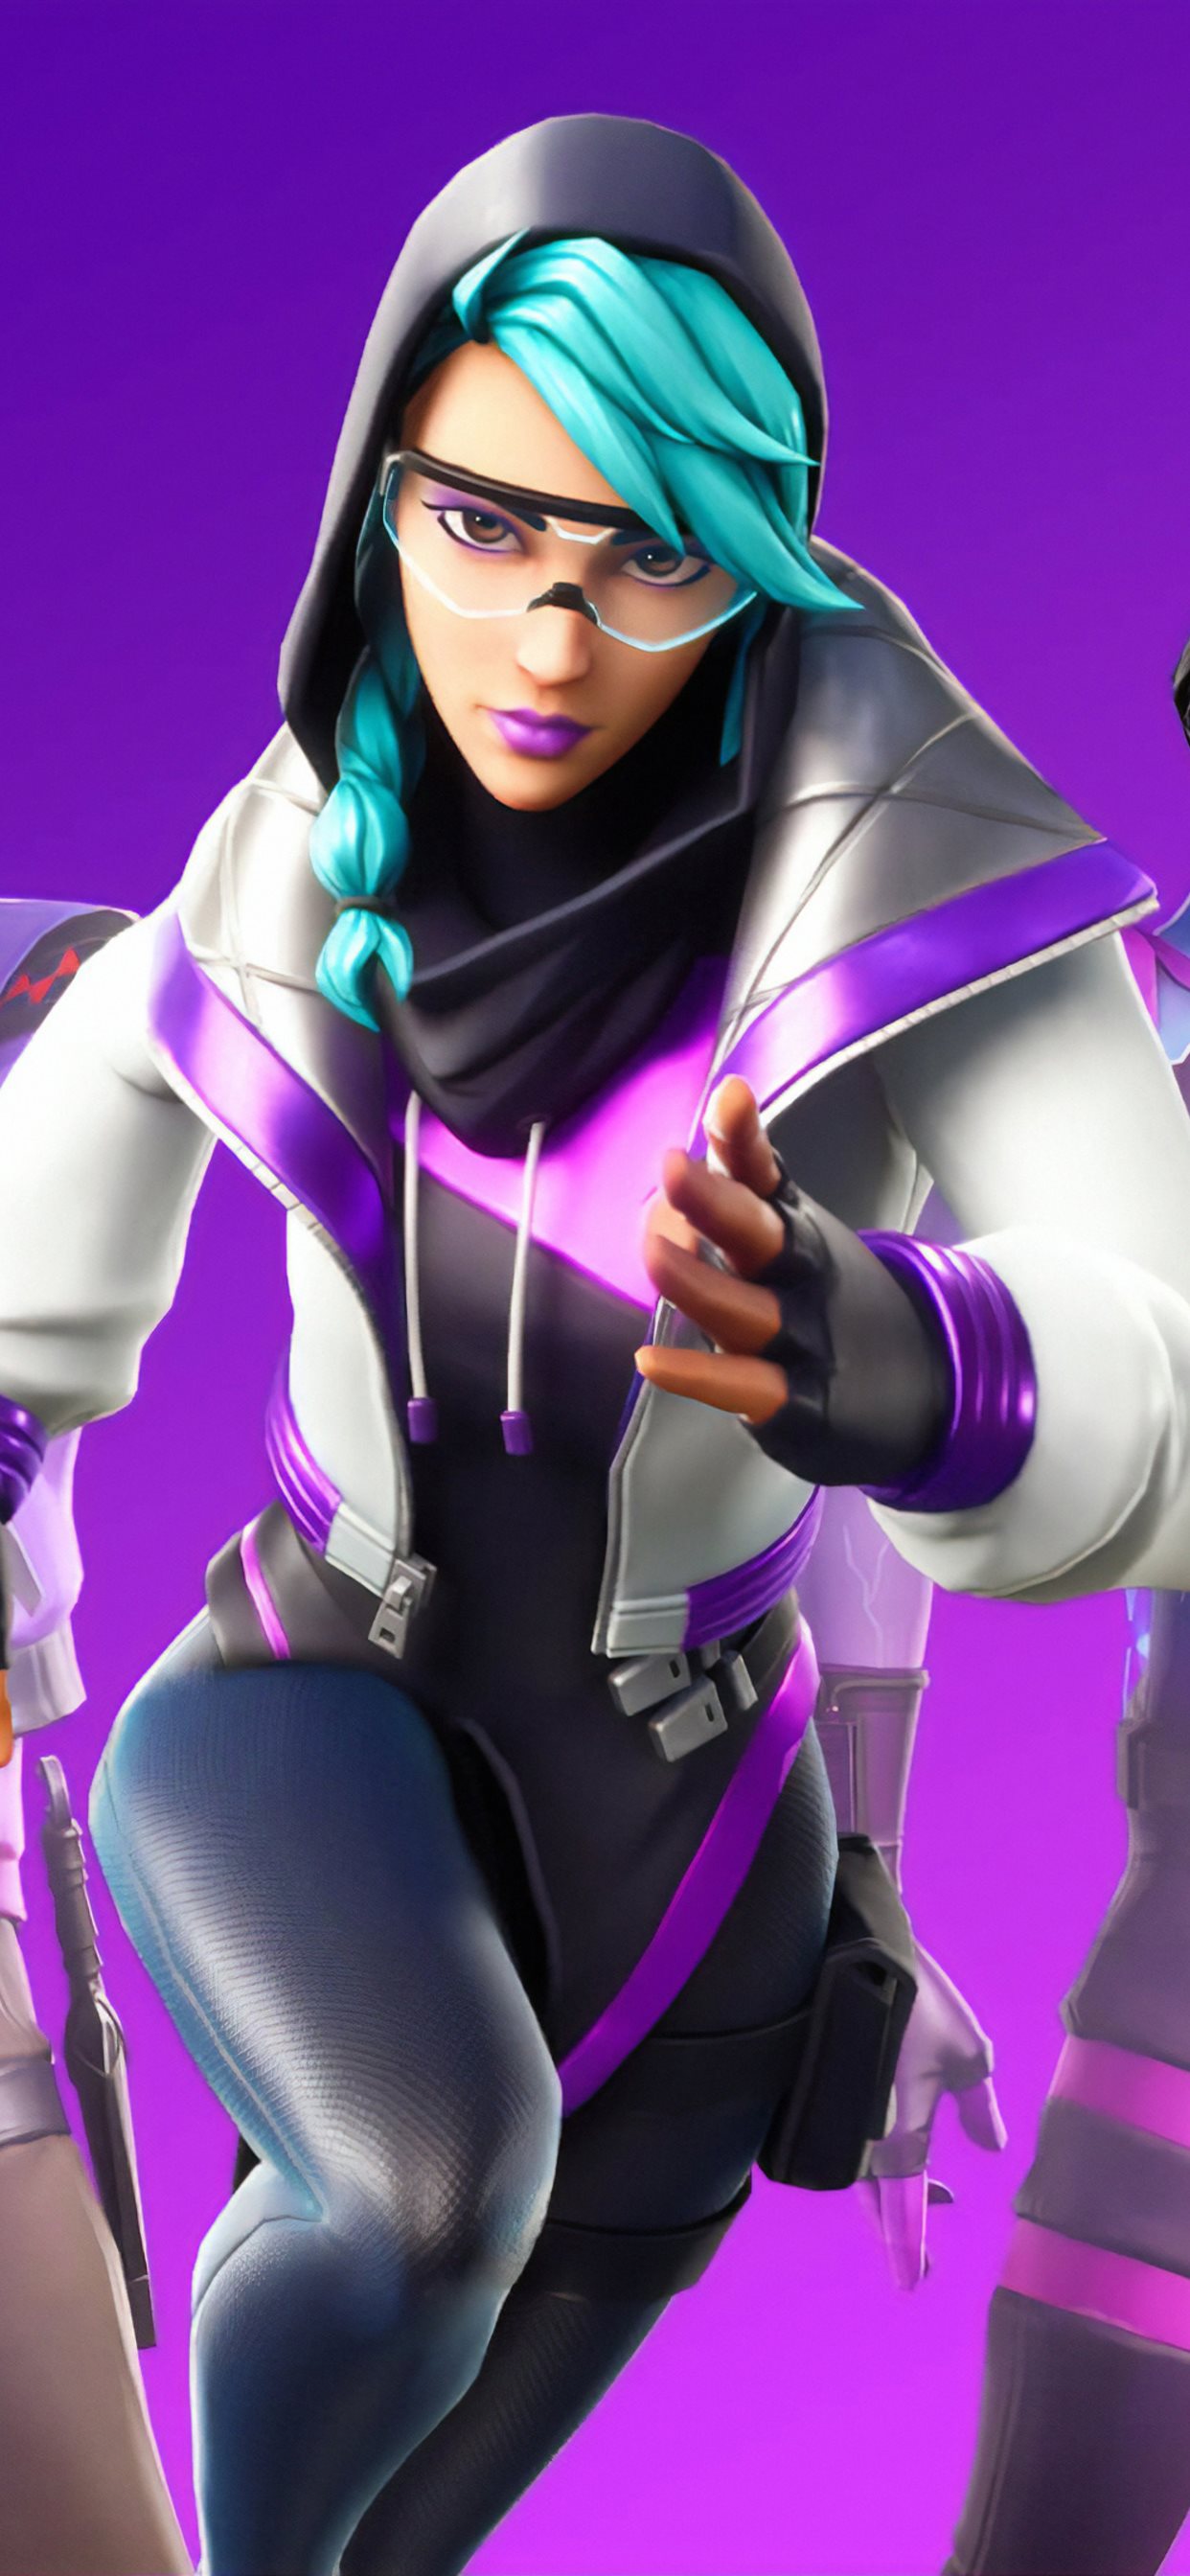 Free download Fortnite Wallpapers HD Desktop PC Mac iPhone Android Latest  499x1024 for your Desktop Mobile  Tablet  Explore 19 Fortnite Logo  Wallpapers  Fortnite Wallpaper Fortnite Wallpapers Maven Fortnite  Wallpapers